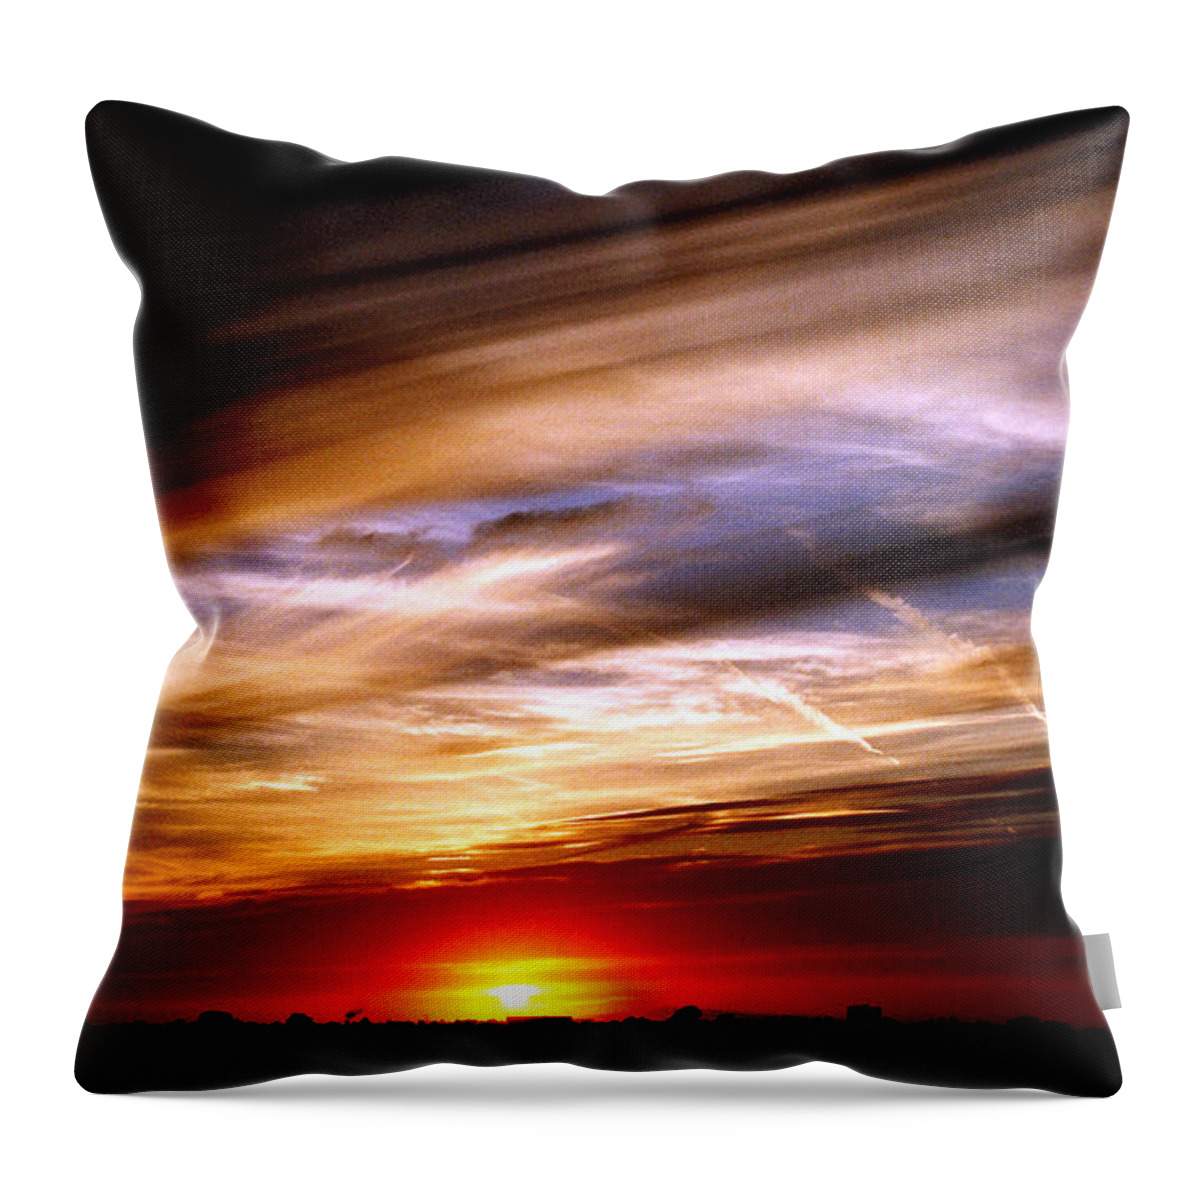 Sunset Throw Pillow featuring the photograph Vista Nobleza by Andre Aleksis